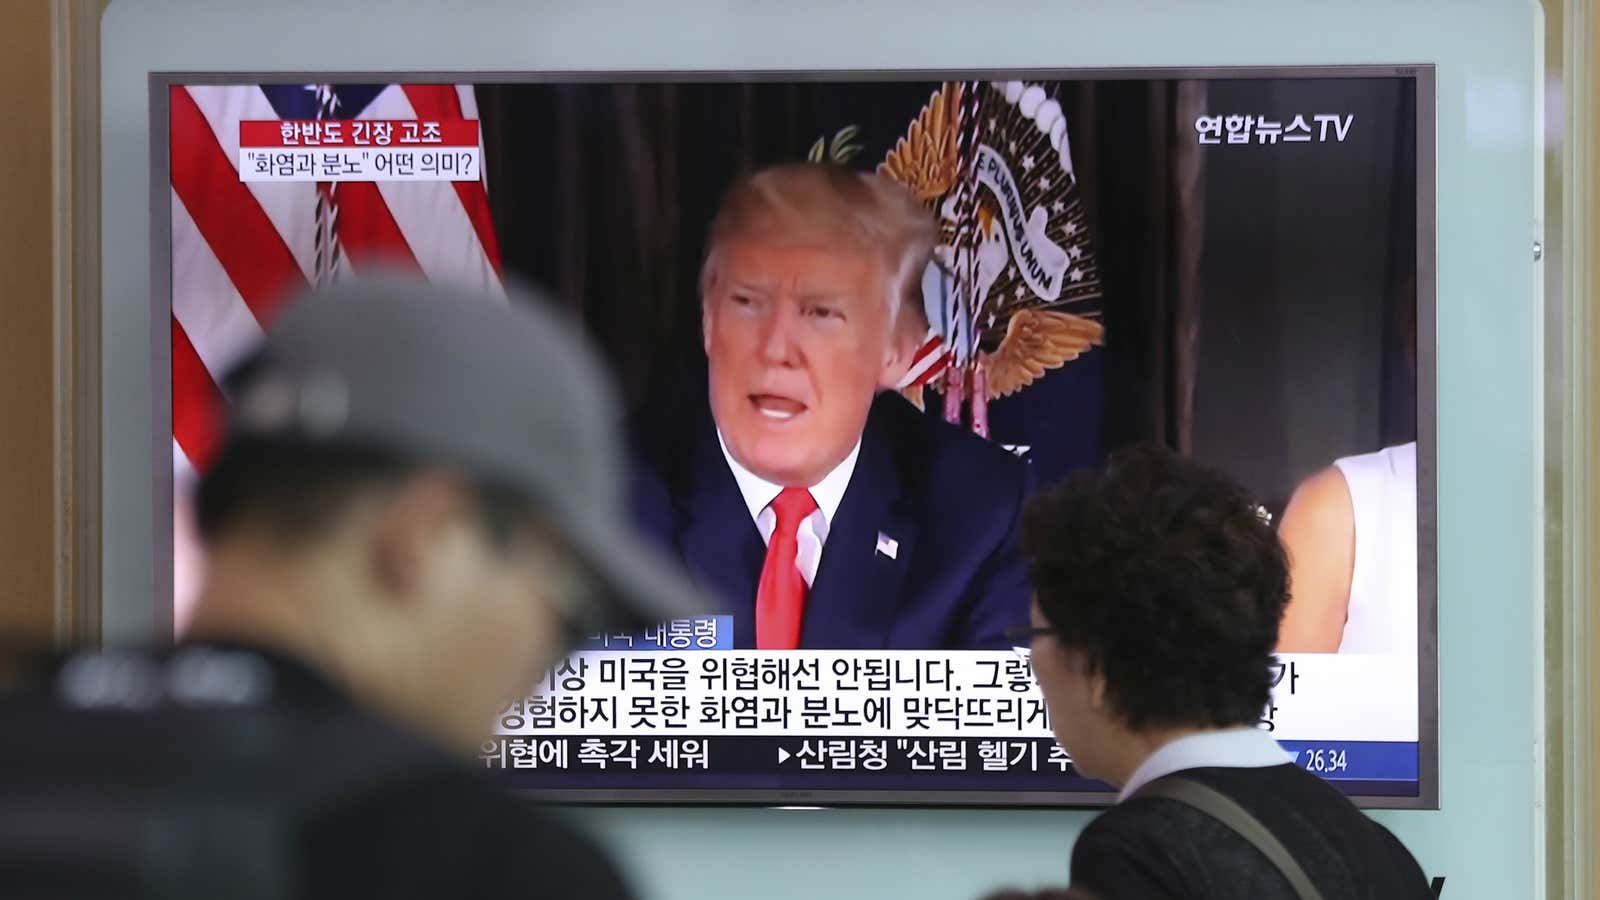 Trump’s statement about North Korea made headlines all over the world.